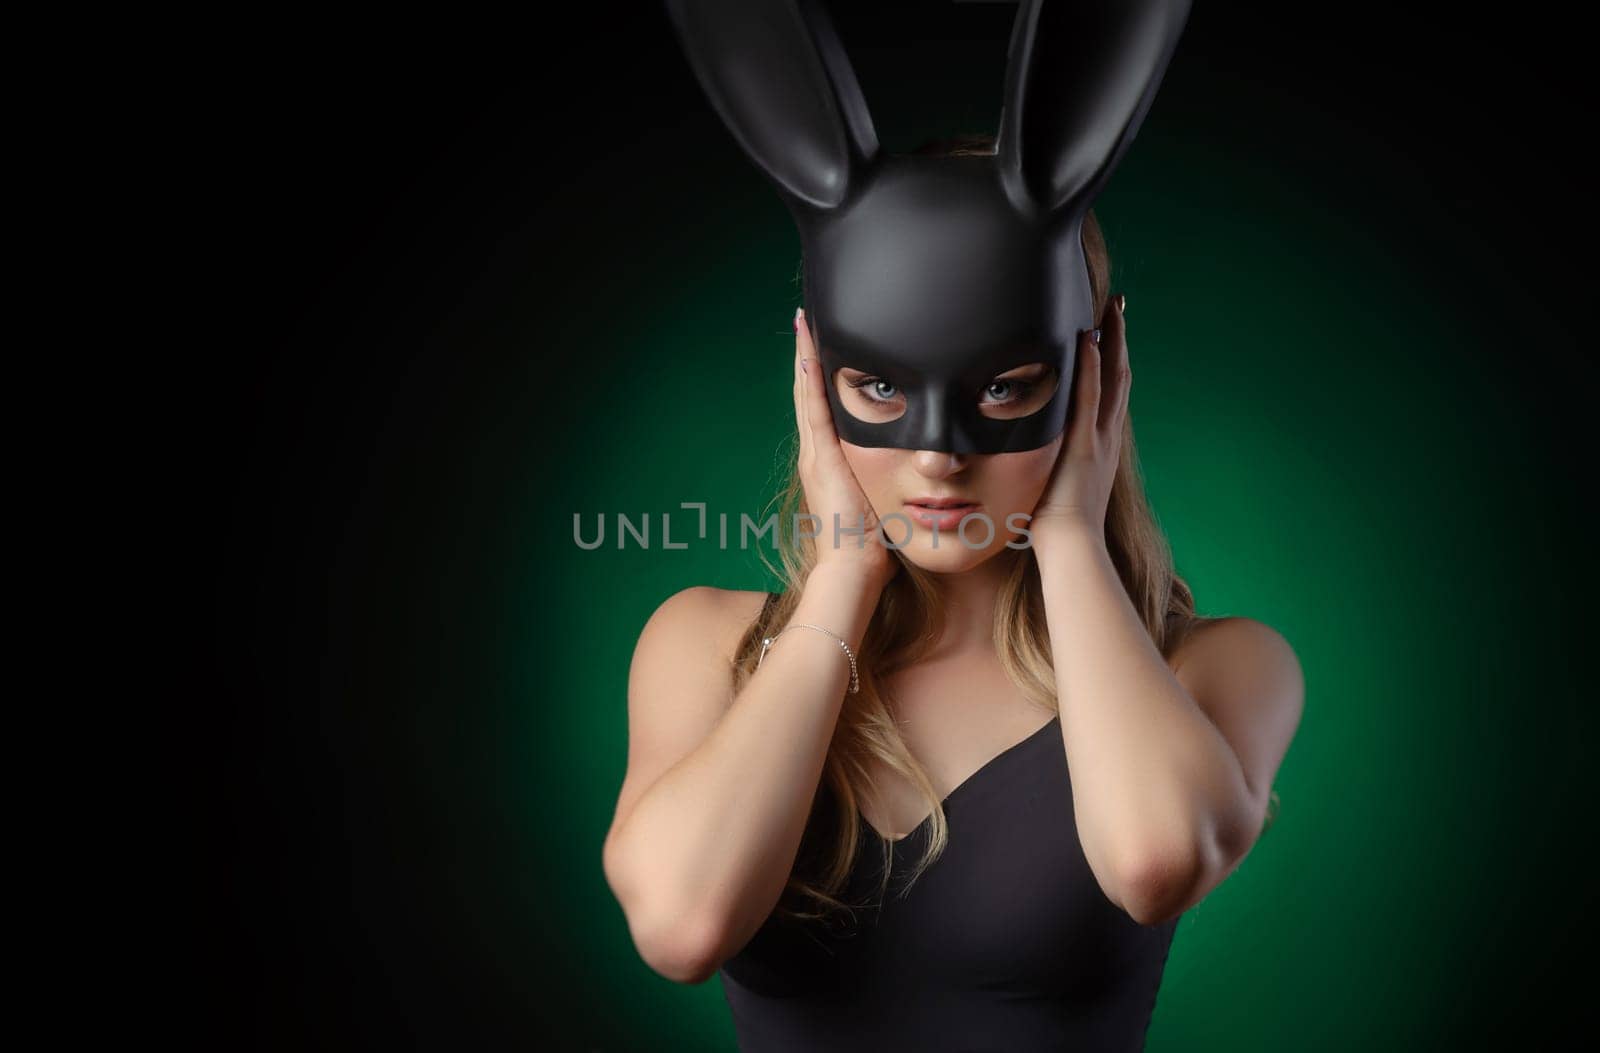 girl in a rabbit mask with beautiful eyes on a dark background